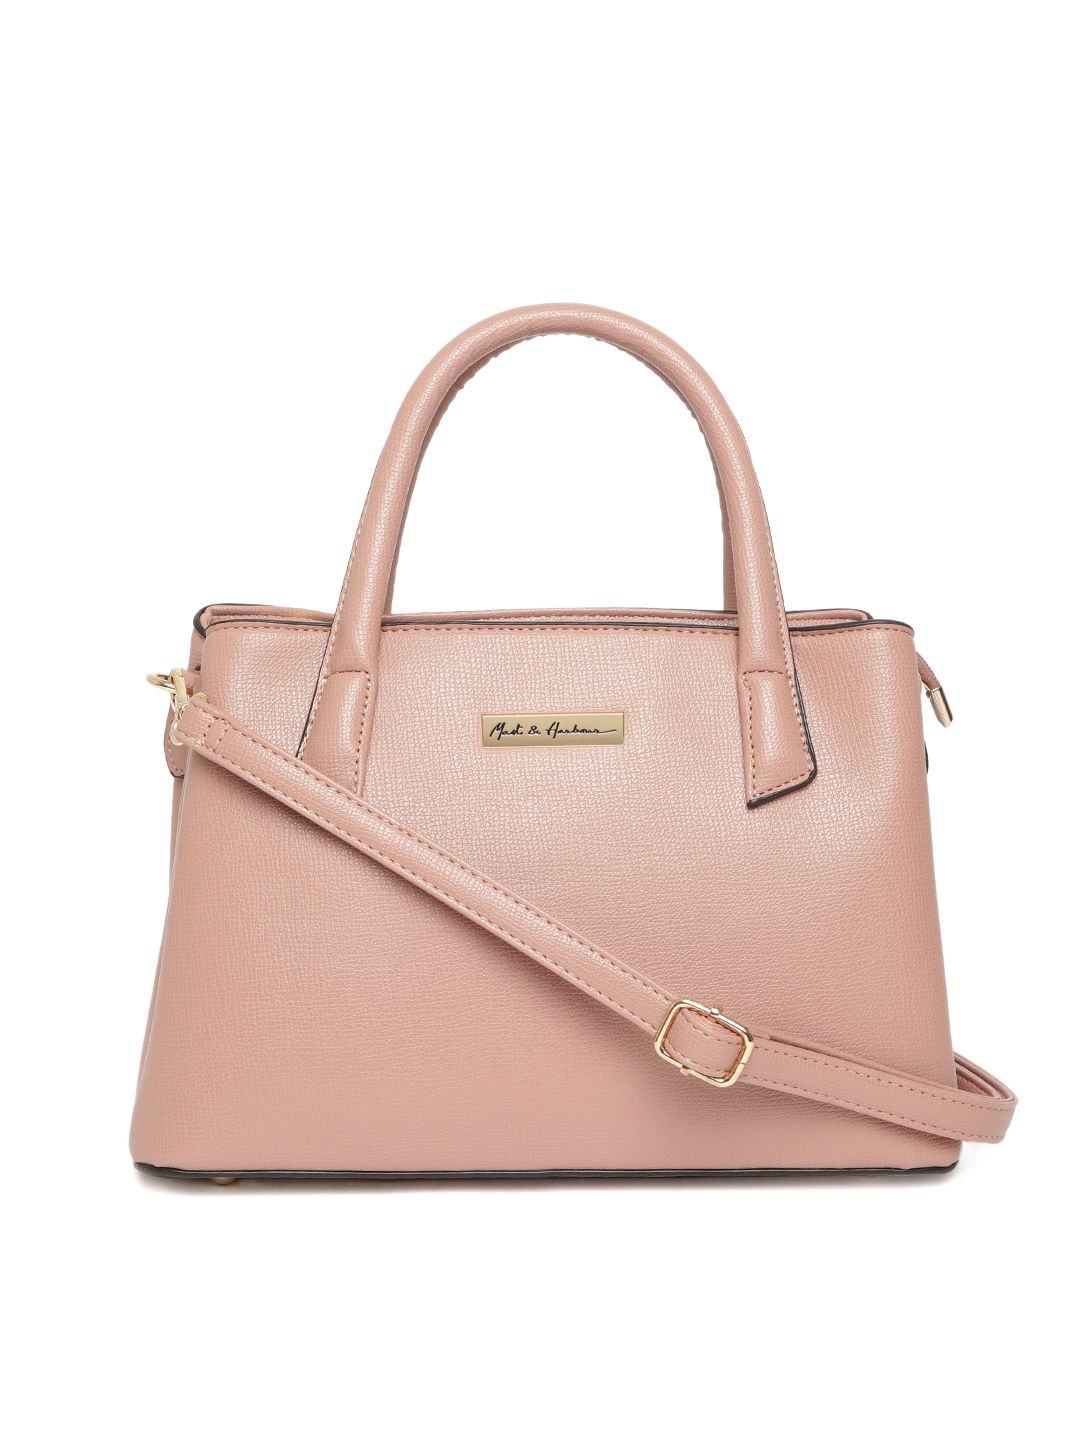 Mast & Harbour Dusty Pink Solid Handheld Bag Price in India